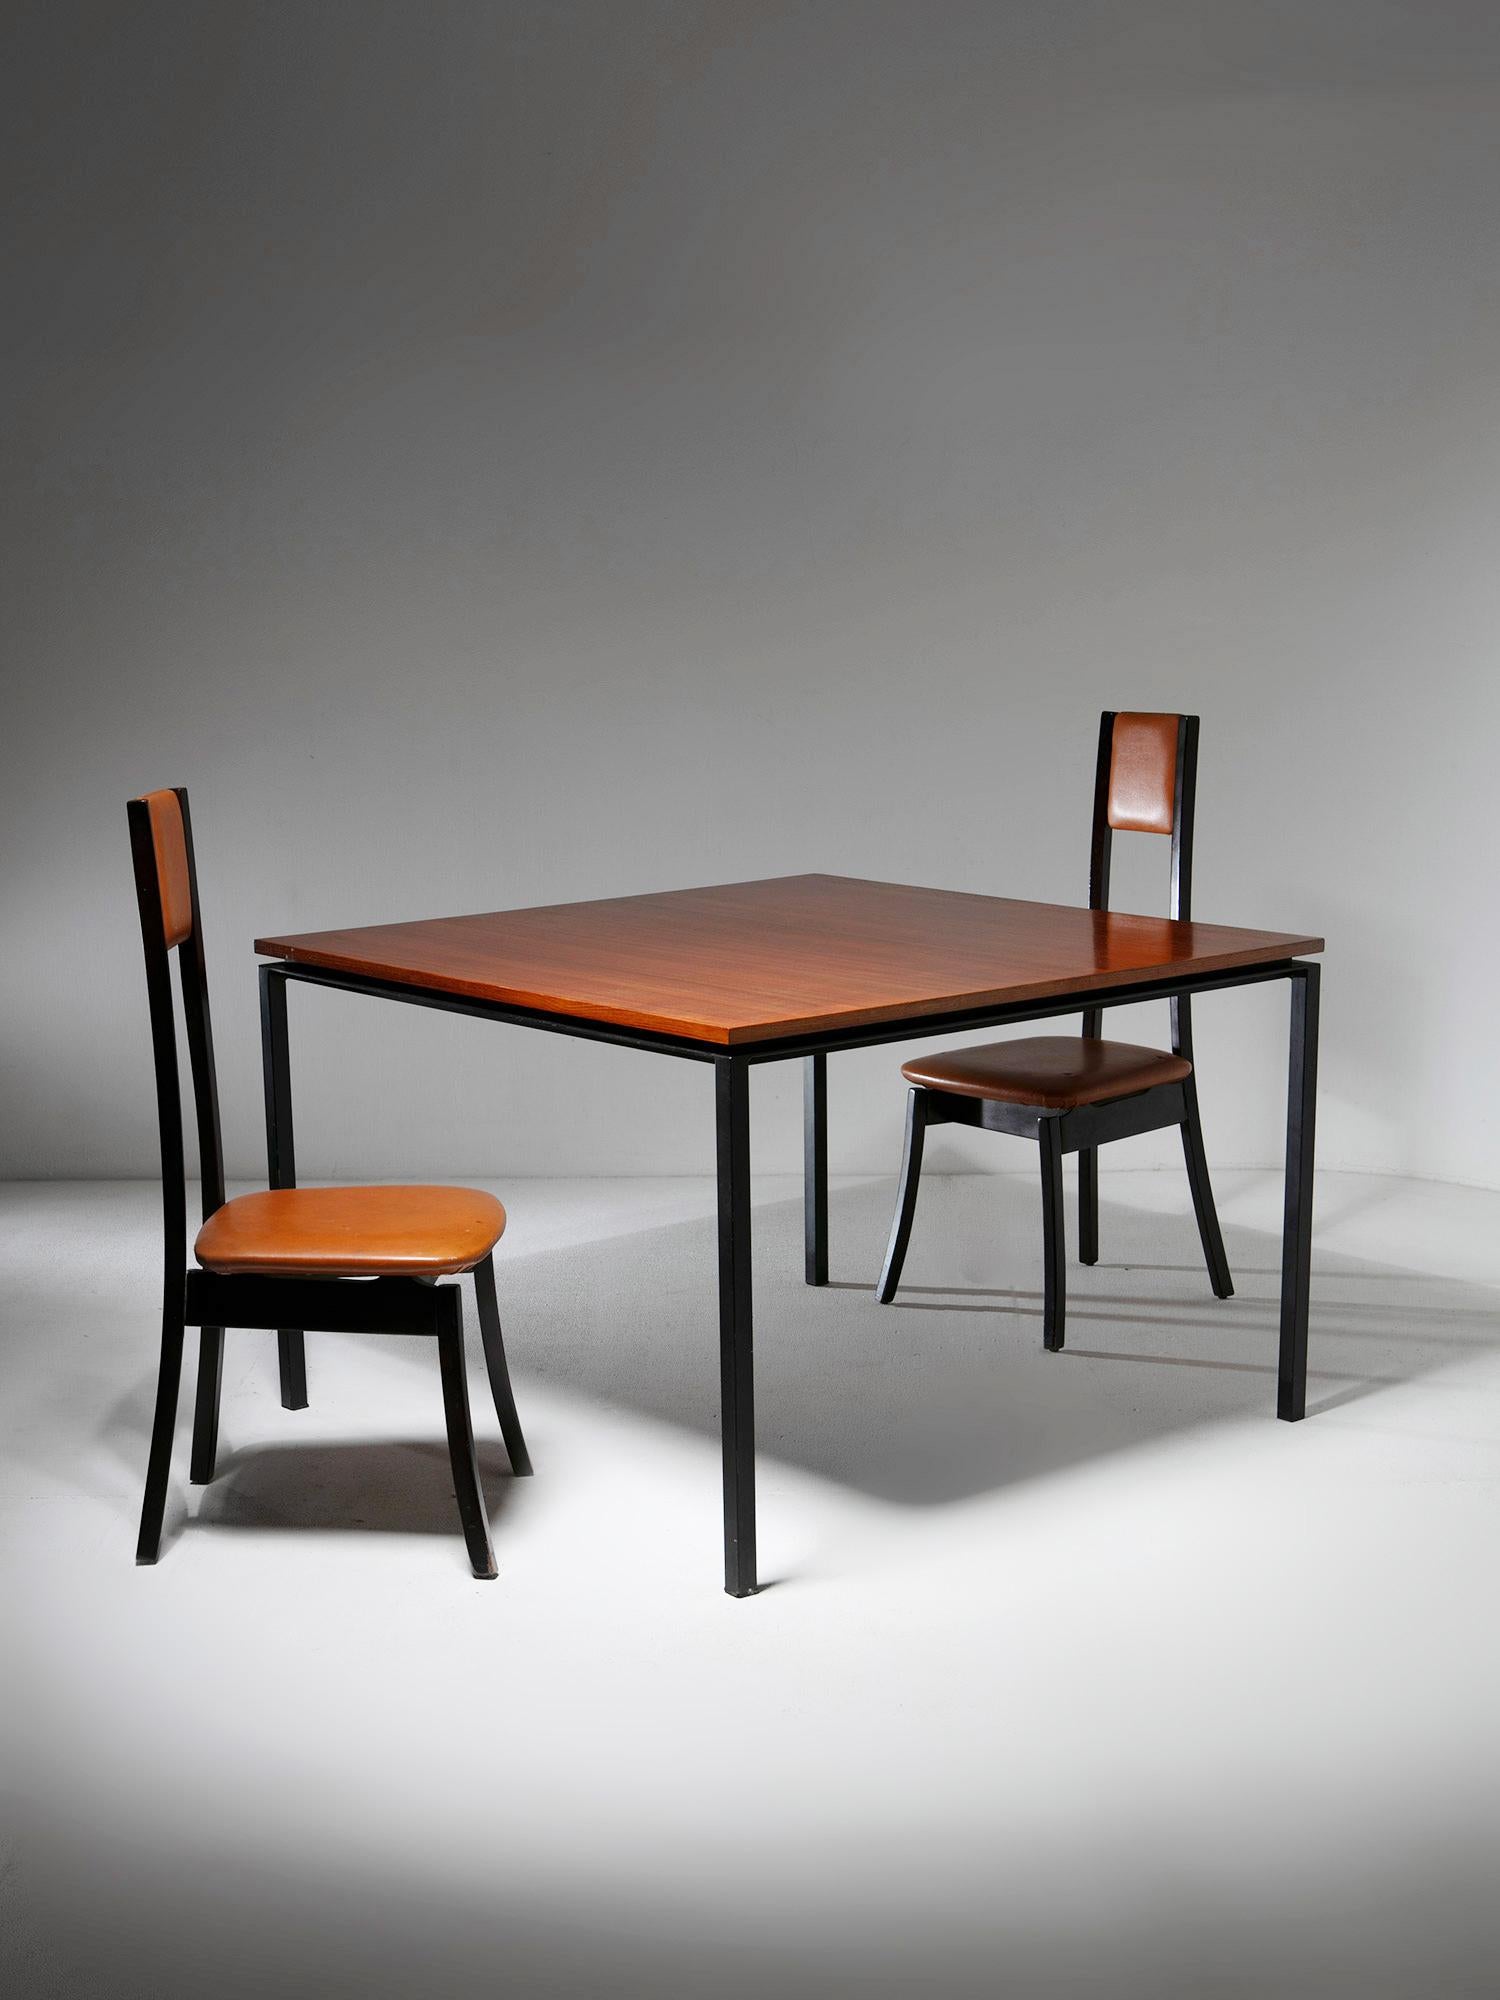 Wood Squared Dining Table by Paolo Tilche for Arform, Italy, 1950s For Sale 2